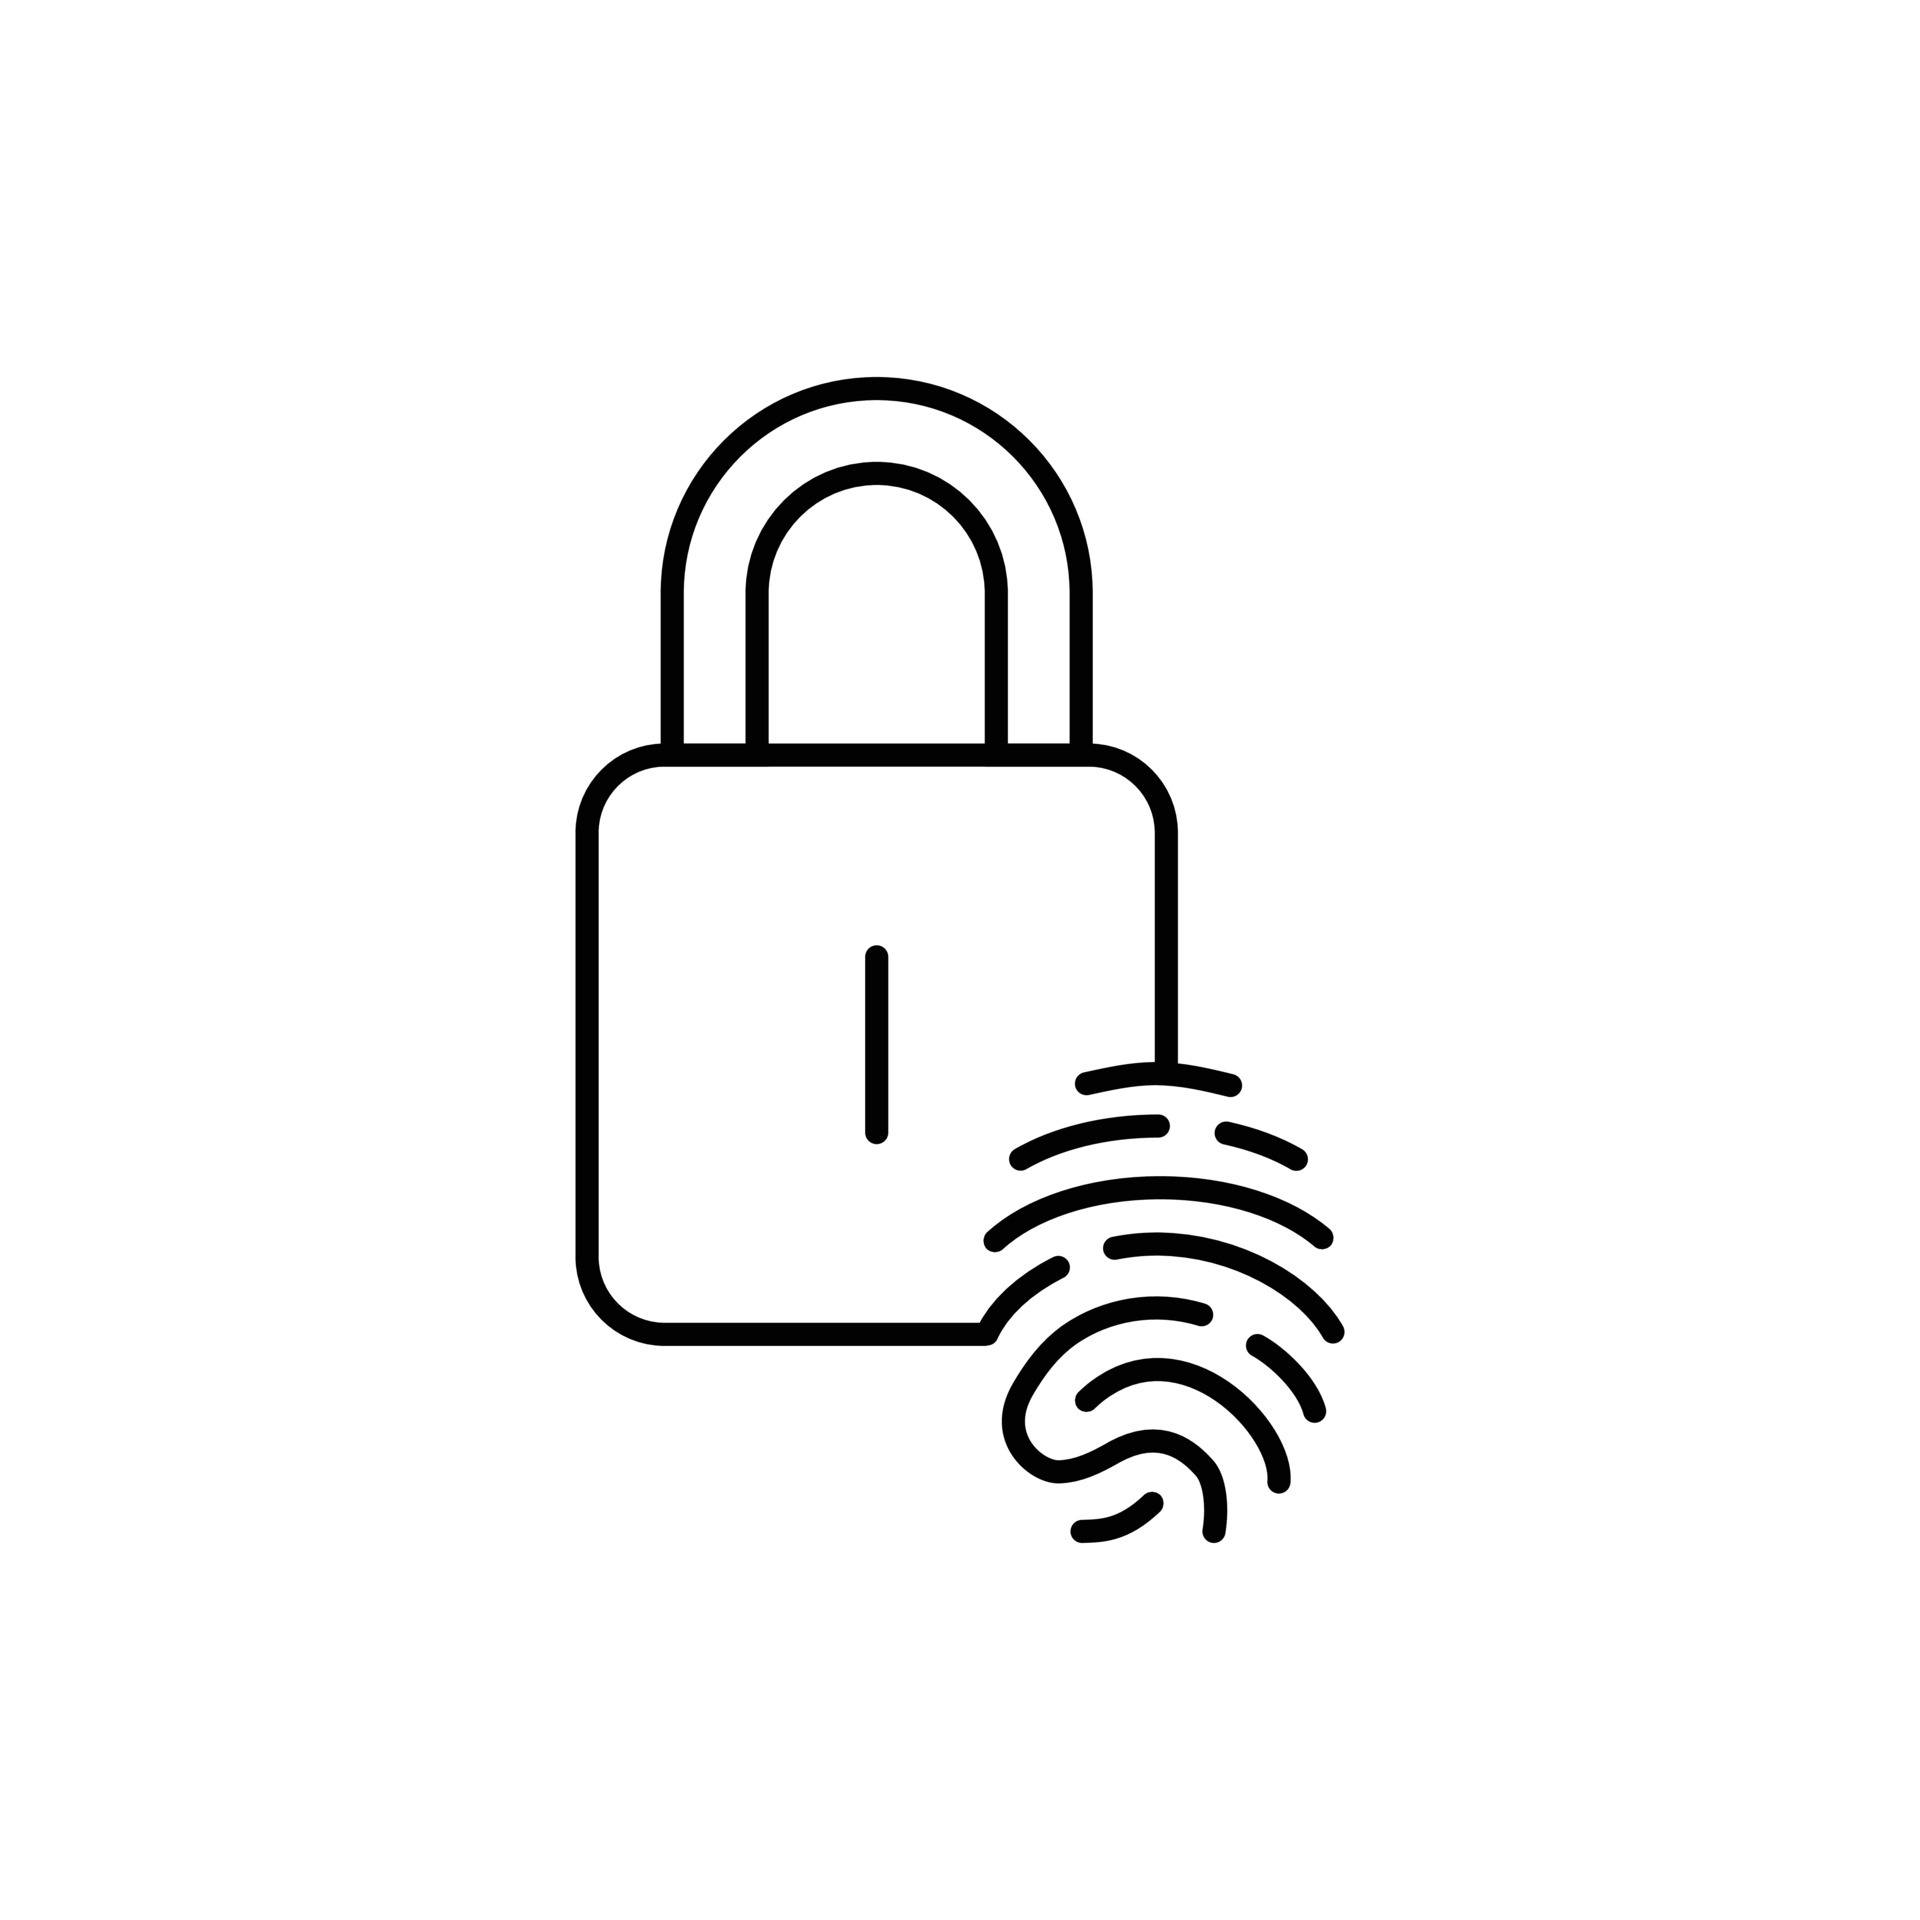 Privacy - Free security icons